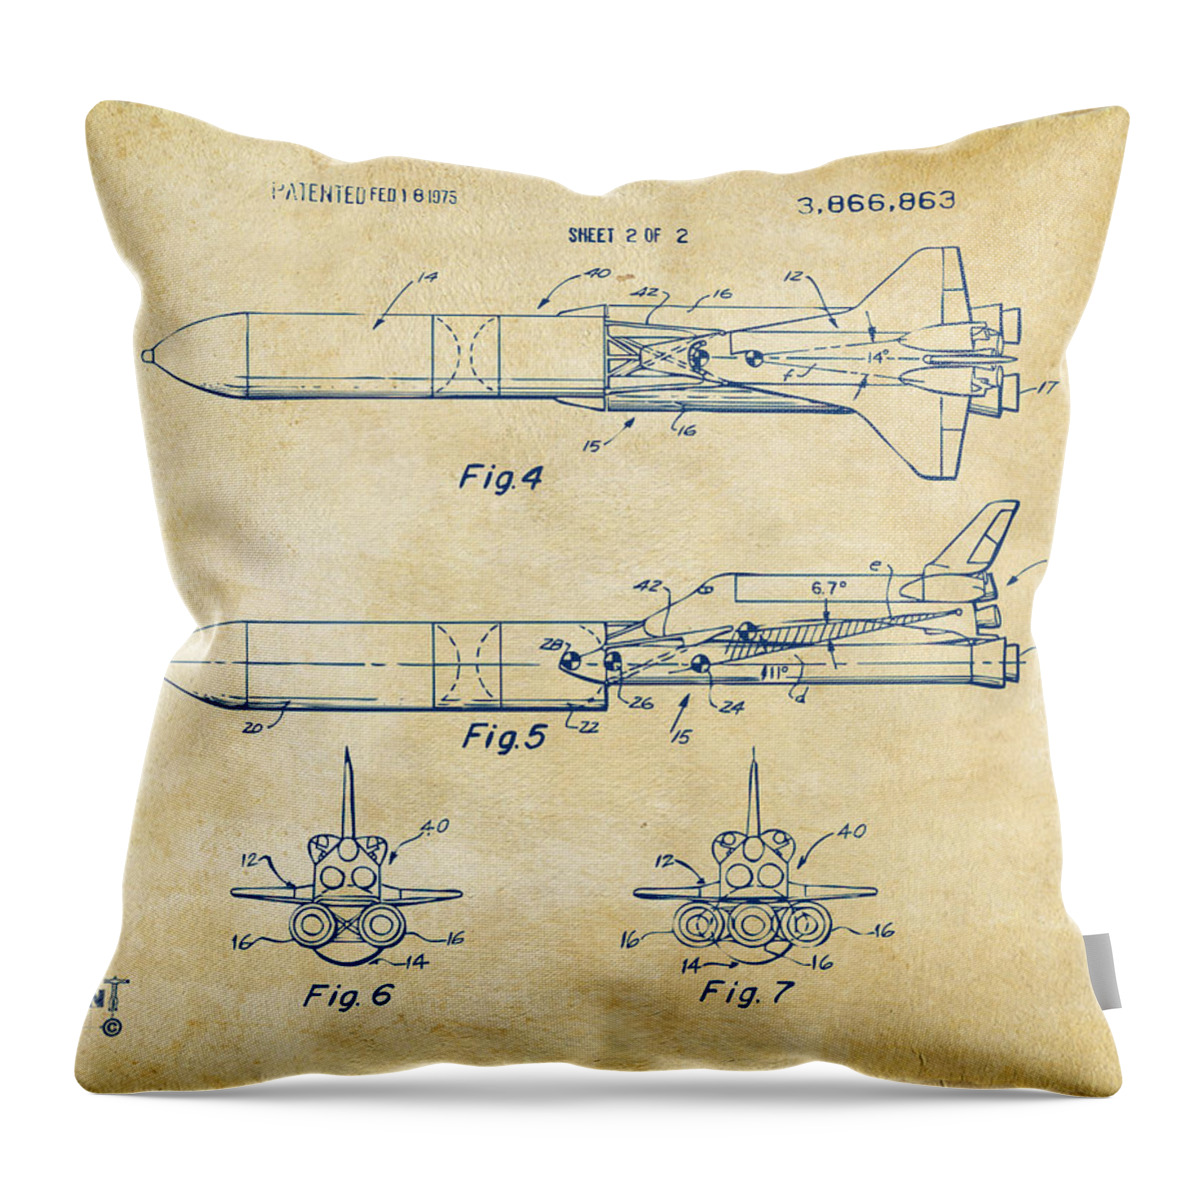 Space Ship Throw Pillow featuring the digital art 1975 Space Vehicle Patent - Vintage by Nikki Marie Smith